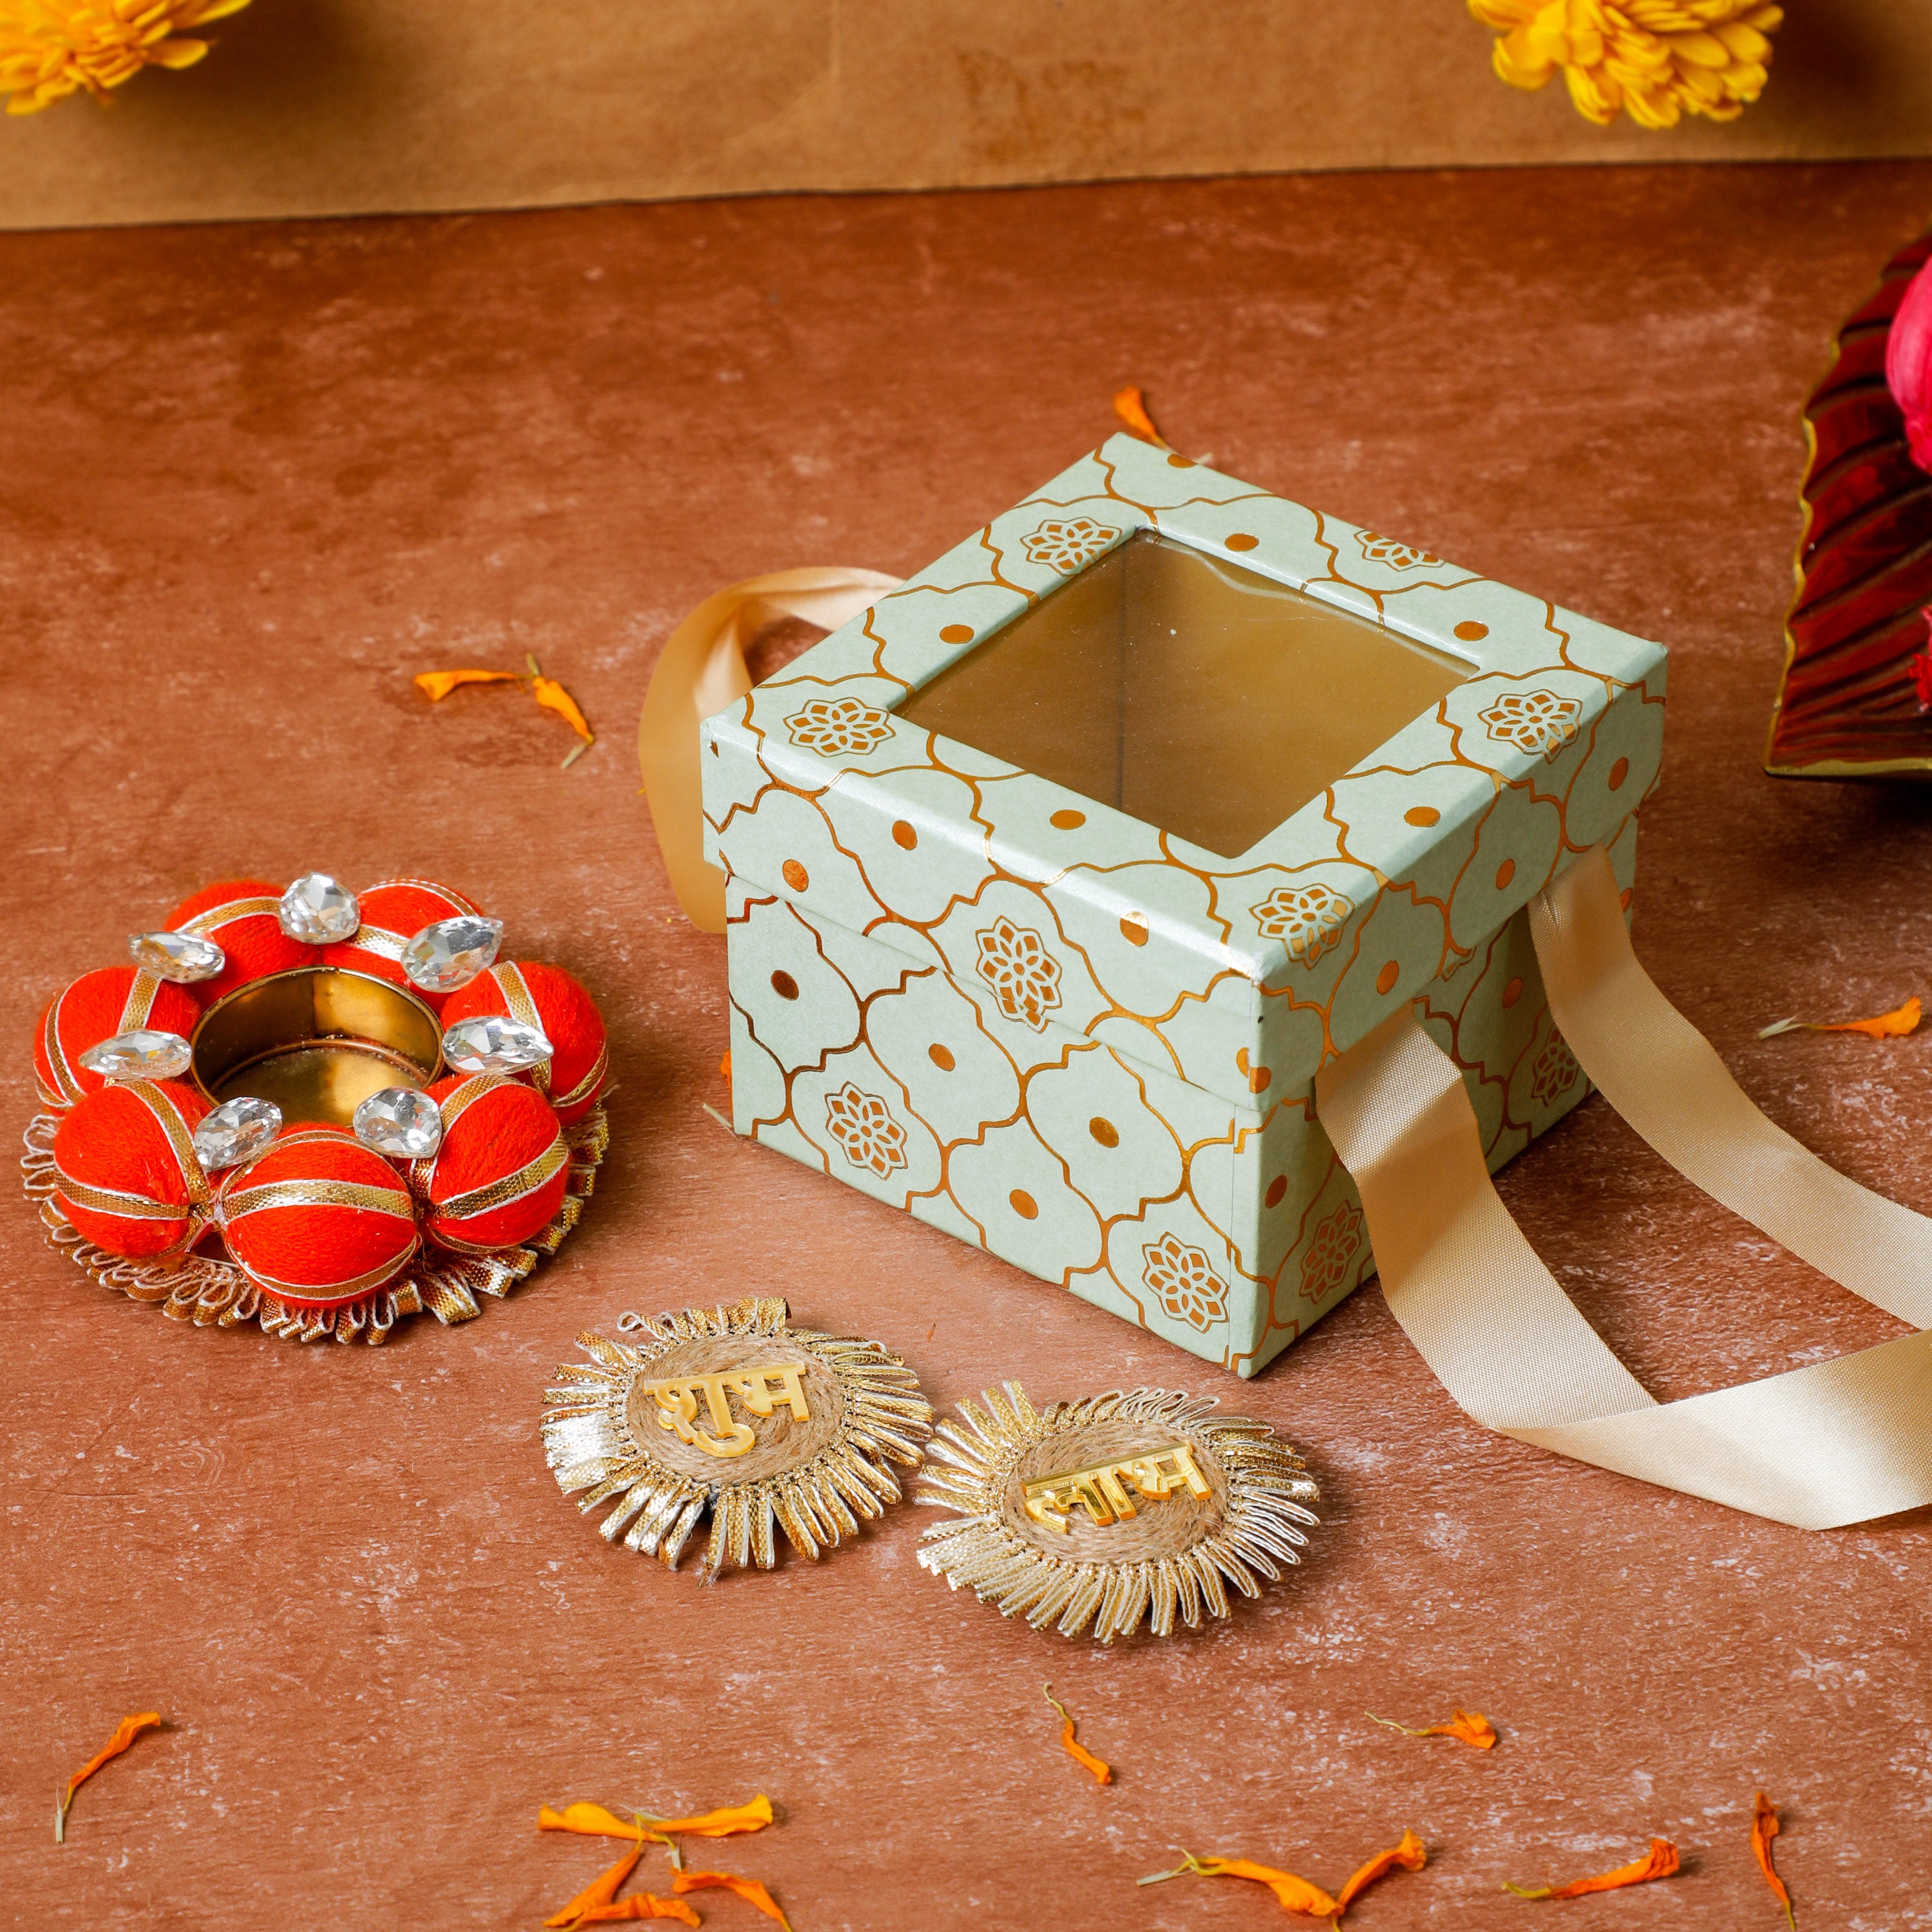 Handmade Diwali Gift Ideas for Your Kids - Celebrate Diwali with your Kids